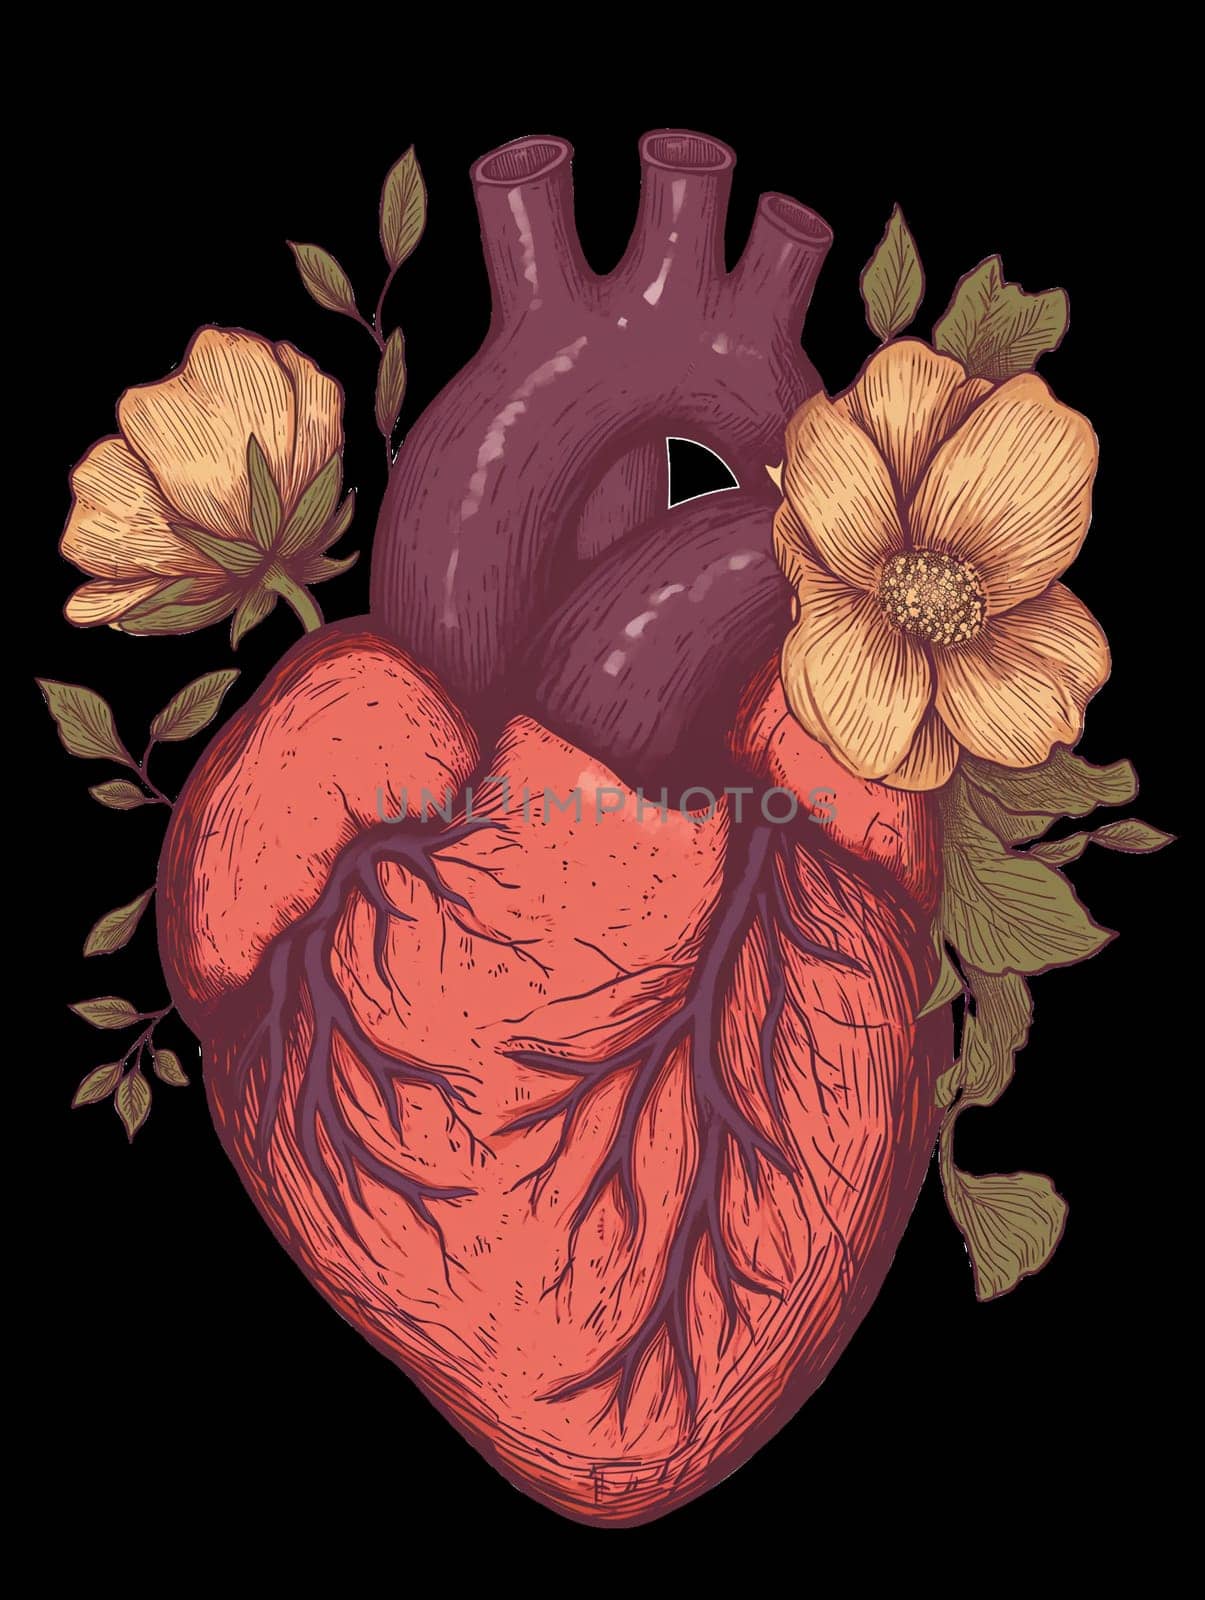 Hand Drawn Illustration of Flower Blooming Heart. Valentine's Day T-shirt and Print Template, Png on Transparent Background by iliris